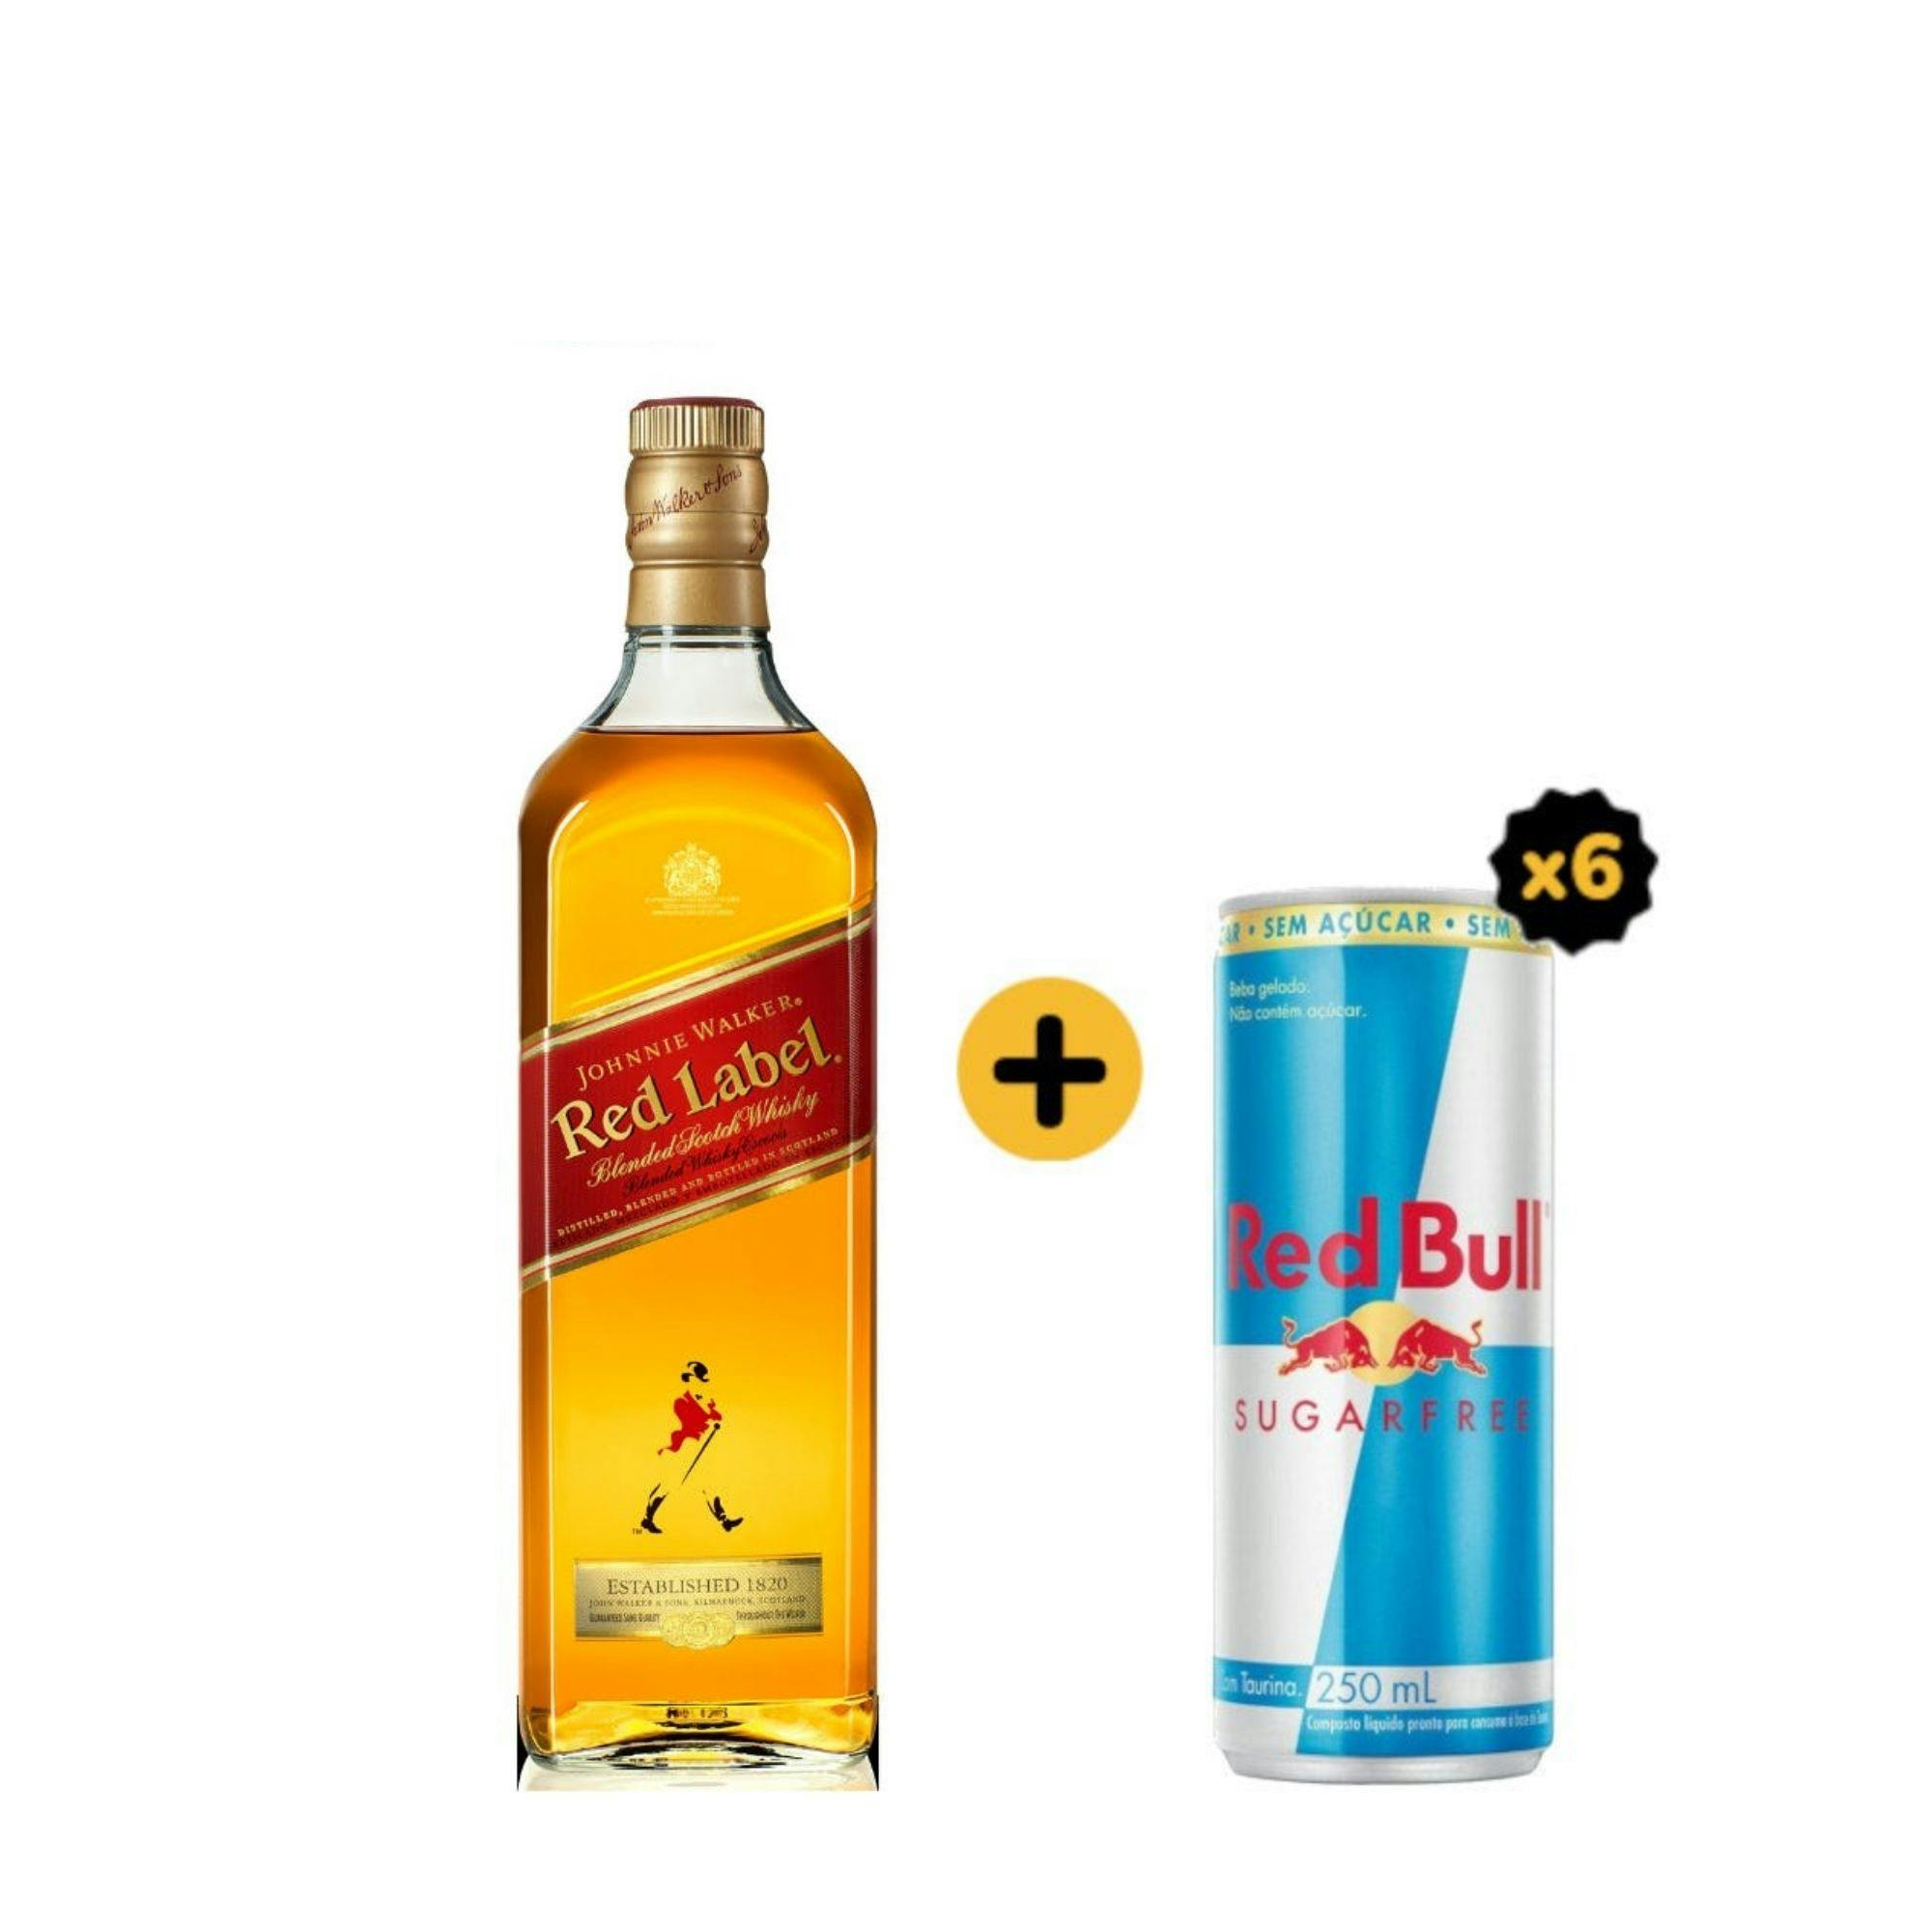 Combo Red Label + Red Bull (1 Whisky Johnnie Walker Red Label 1L + 6 Red Bull Sugarfree 250ml)